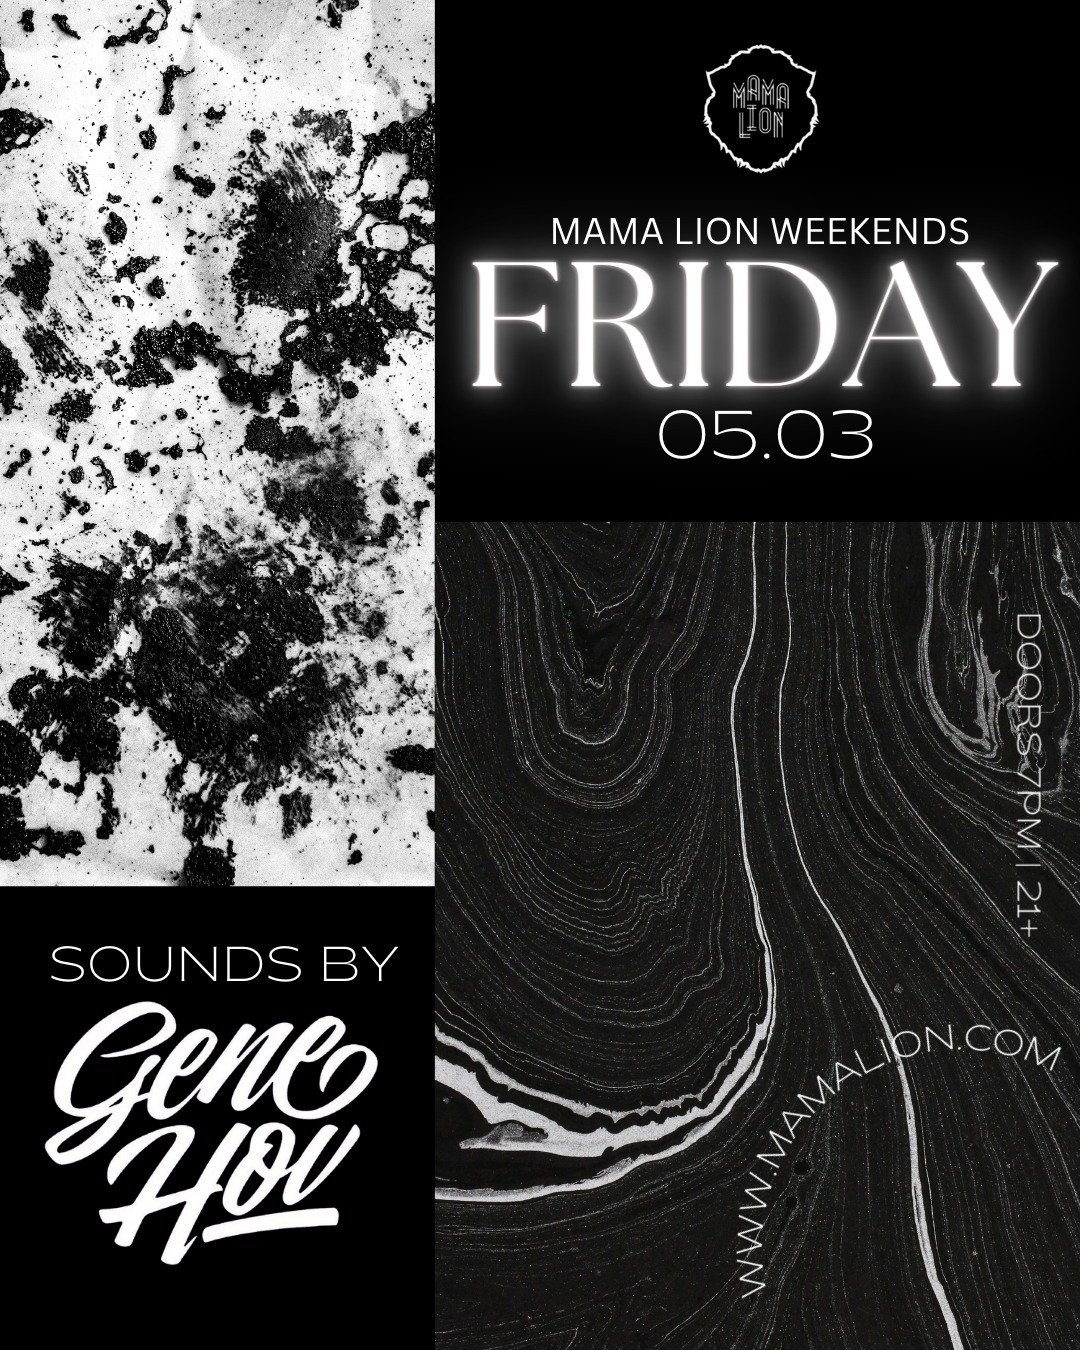 We've got your Friday plans covered ✅
See you at #mamalion 
Sounds by @genehov 

Doors 7pm
www.mamalion.com

#lanightlife #koreatownla #lalounge